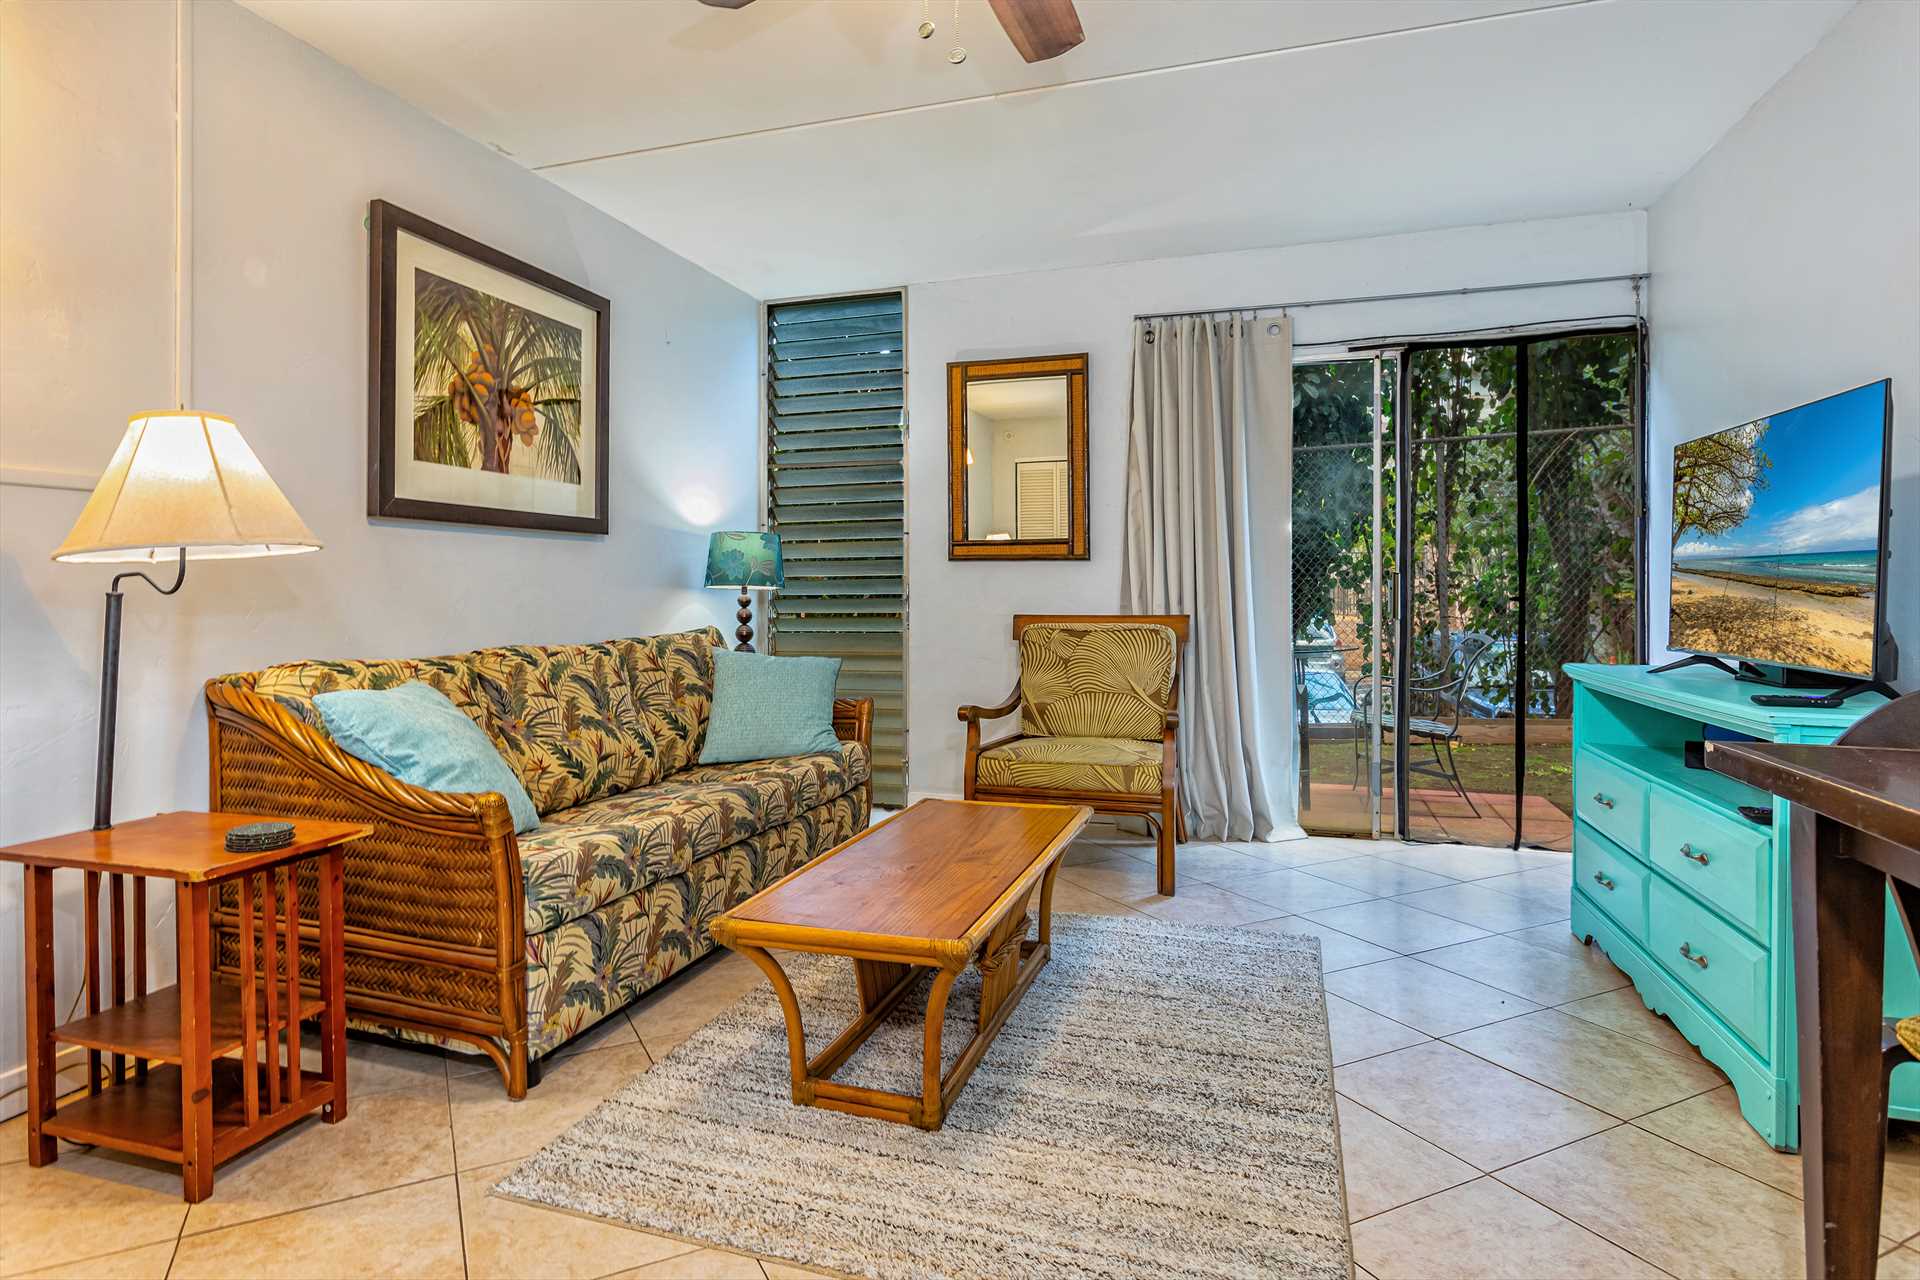 Fully furnished living area with lanai views